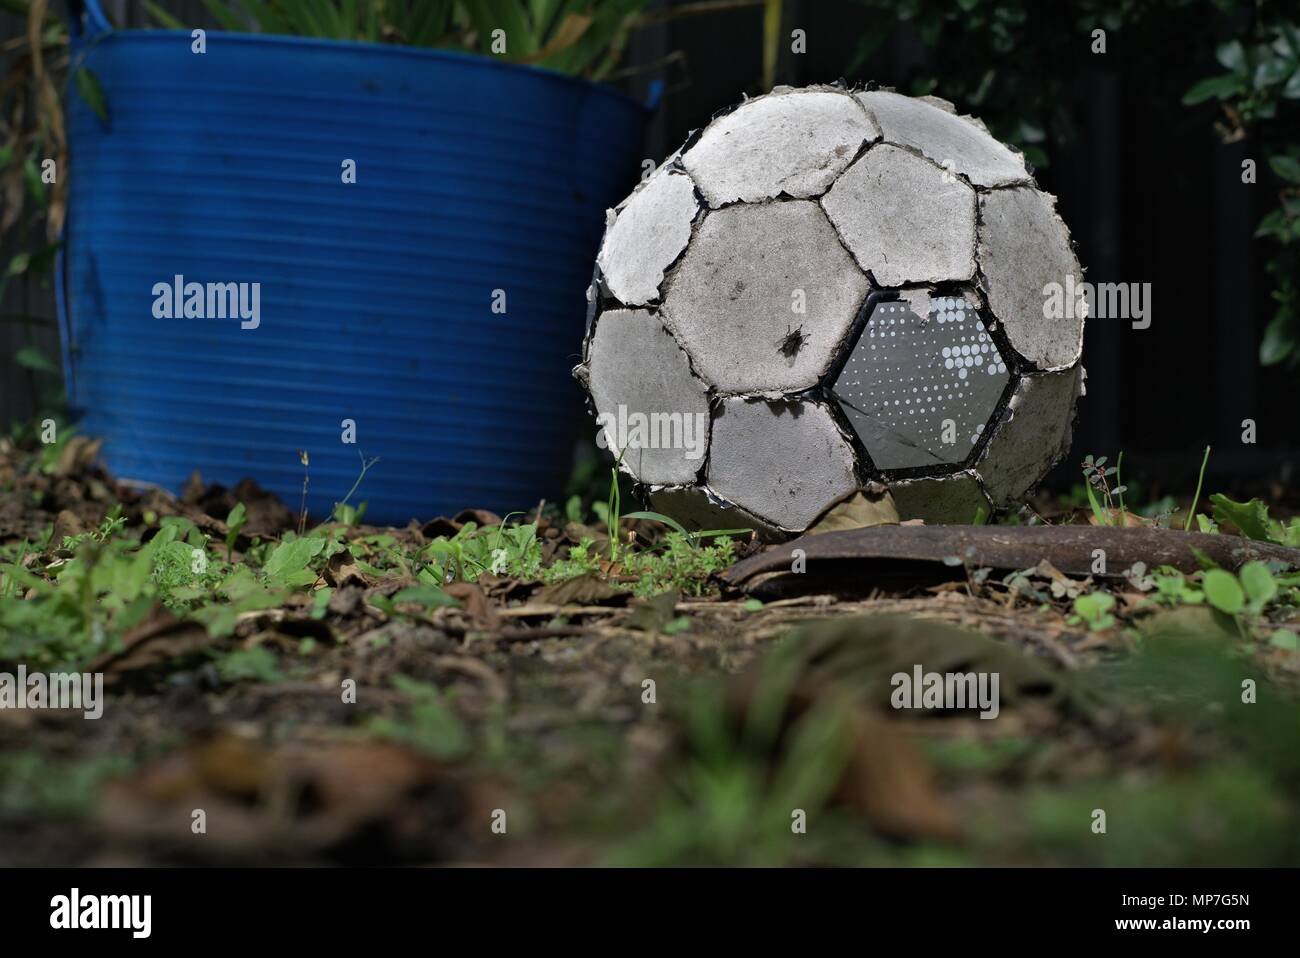 Torn up old soccer ball lay on grass. Worn out football. Concept of inactive person or useless object. Stock Photo